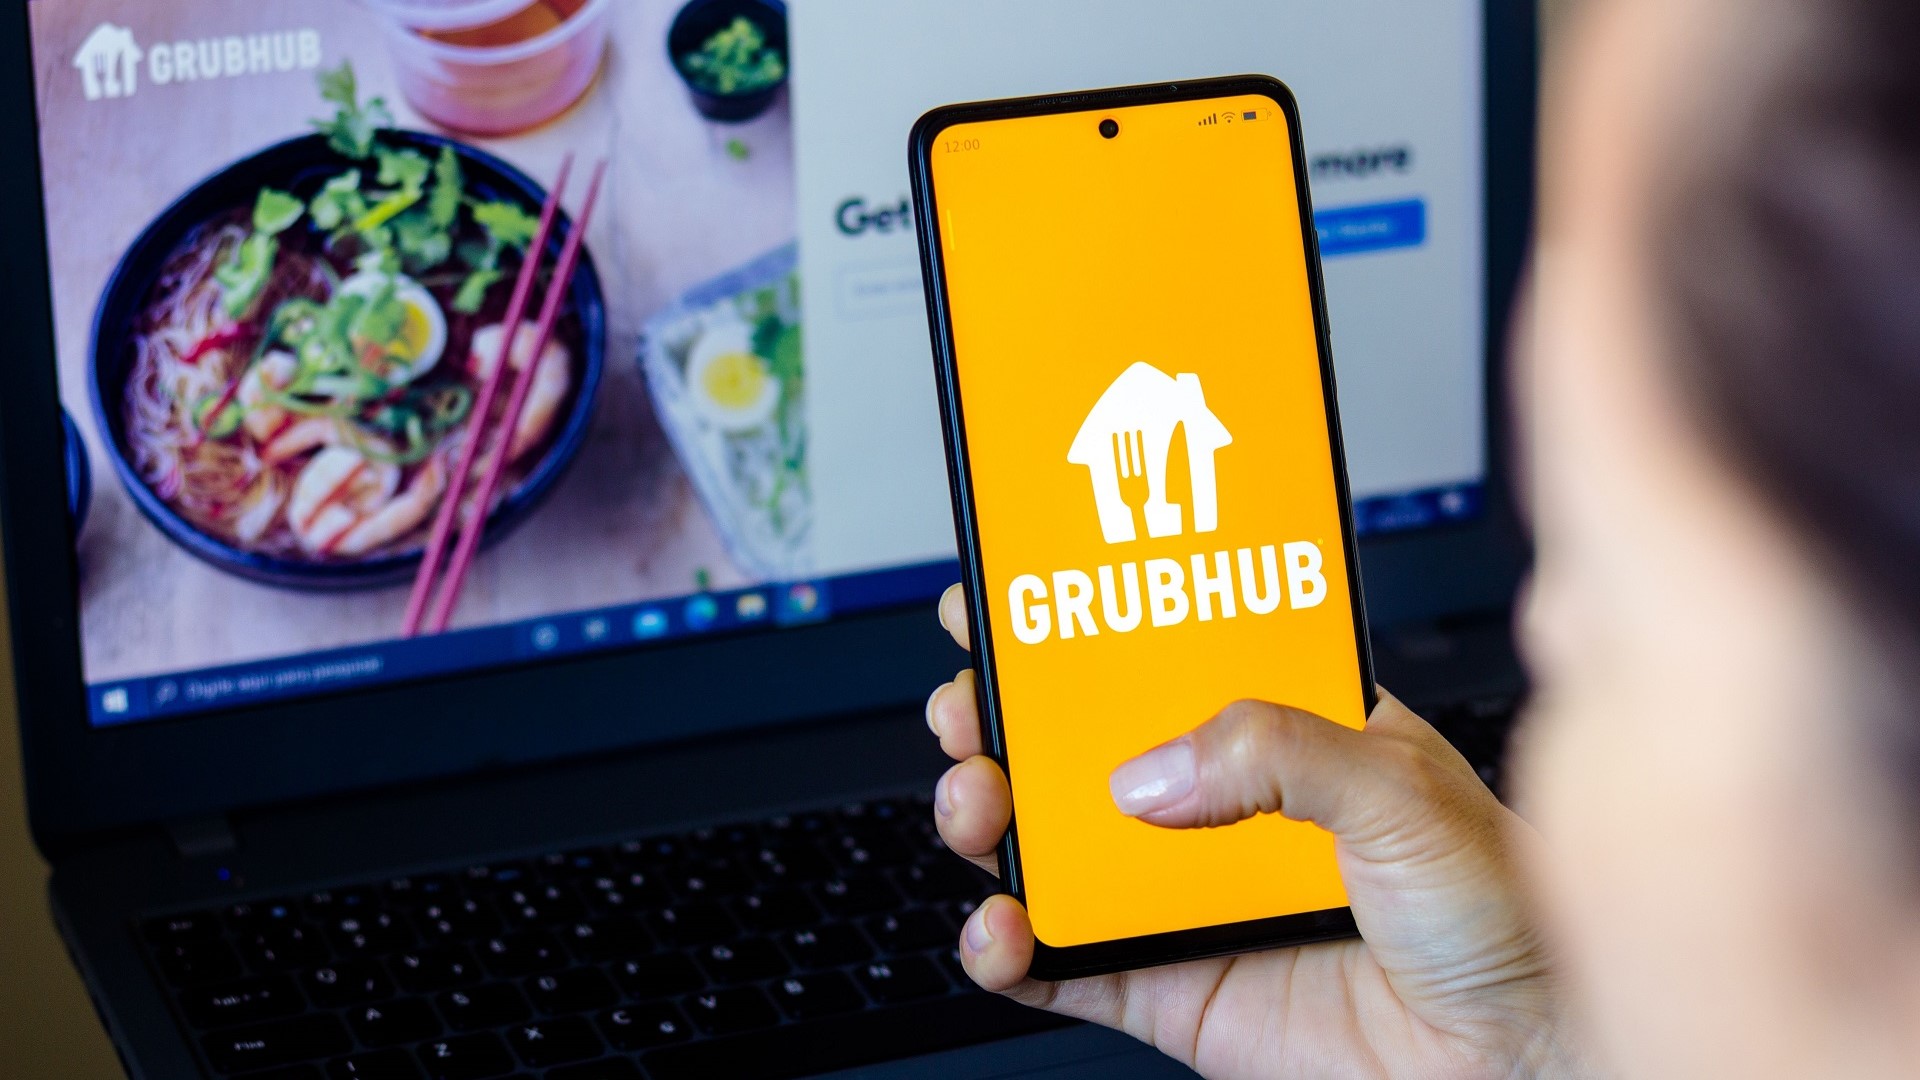 You are currently viewing Free GrubHub for a Year with Amazon Prime — How To Score Deal Following Partnership